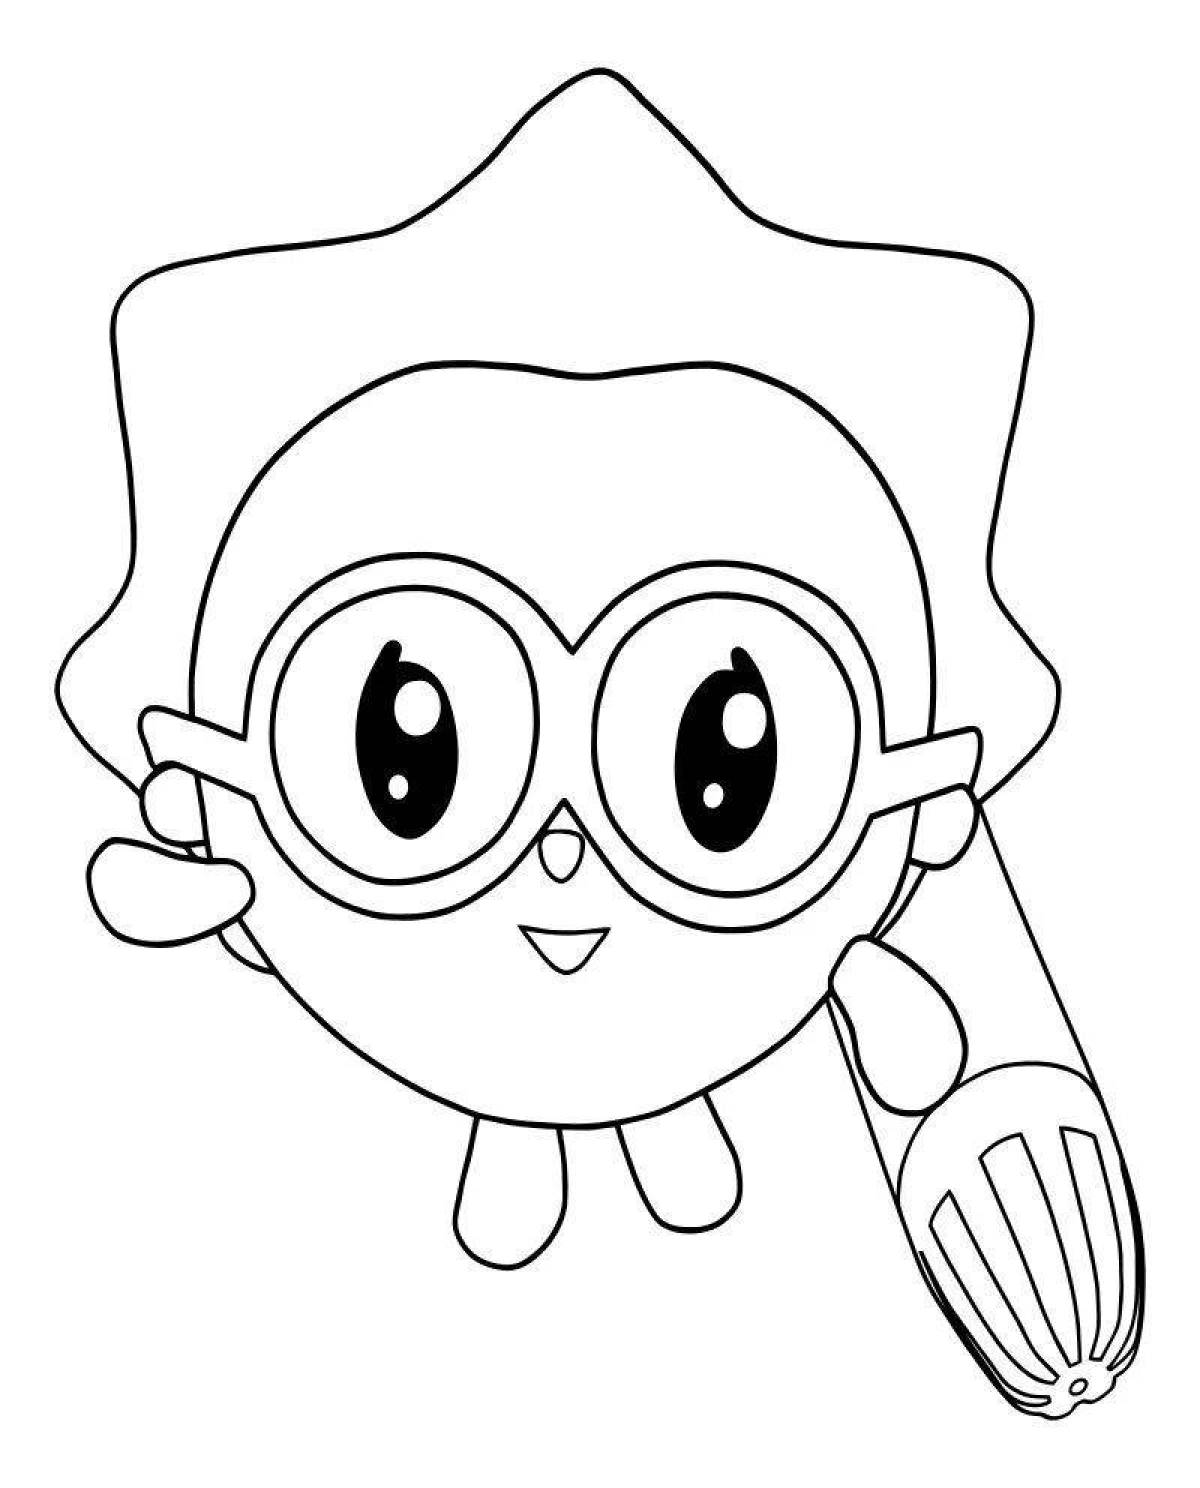 Intriguing coloring pages for children, new series